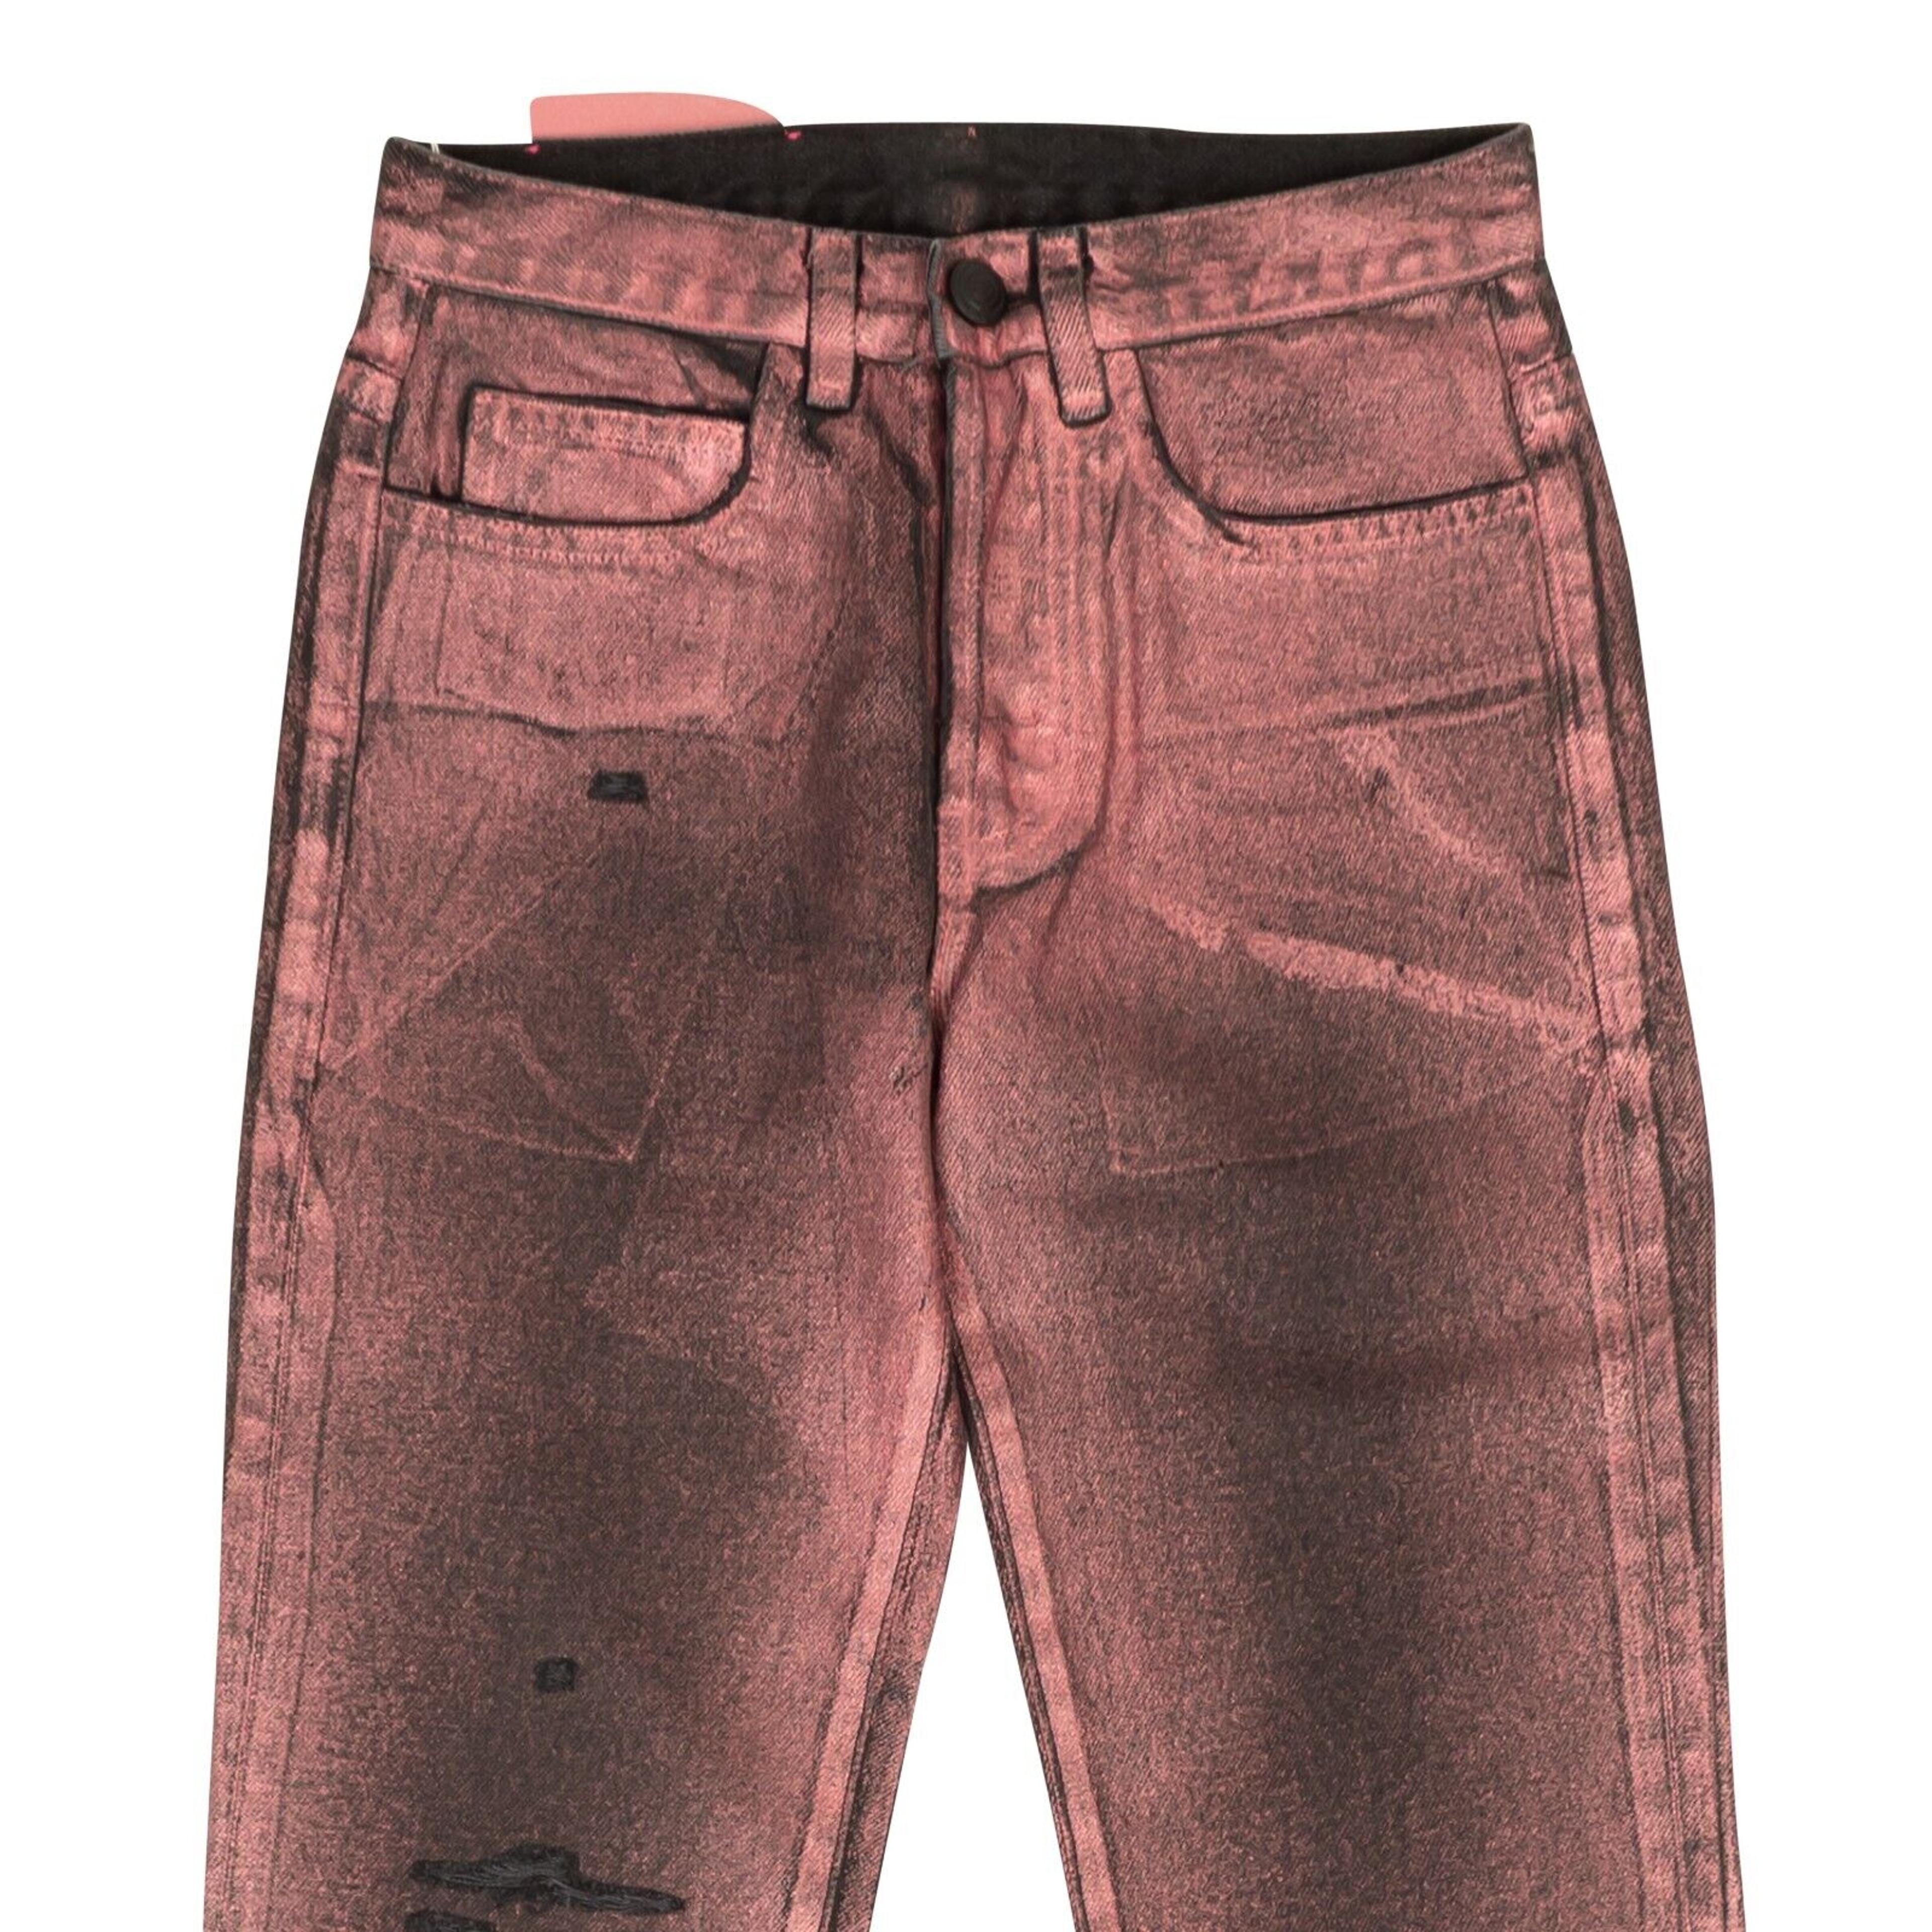 Alternate View 1 of Black And Pink Metallic Wash Jeans